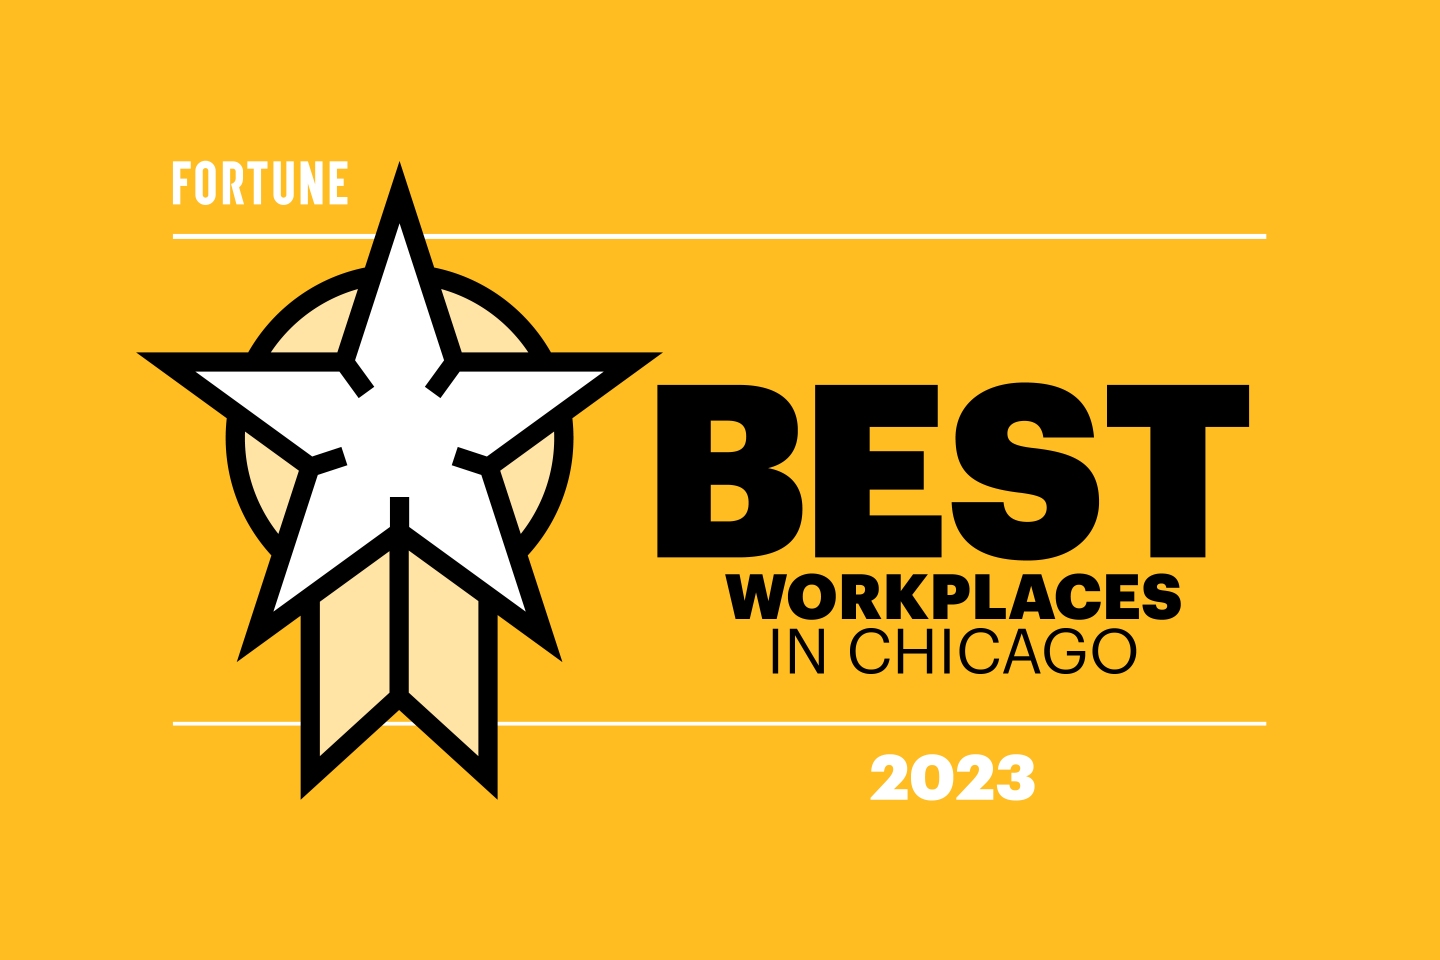 35 Best Small and Medium Workplaces in Chicago